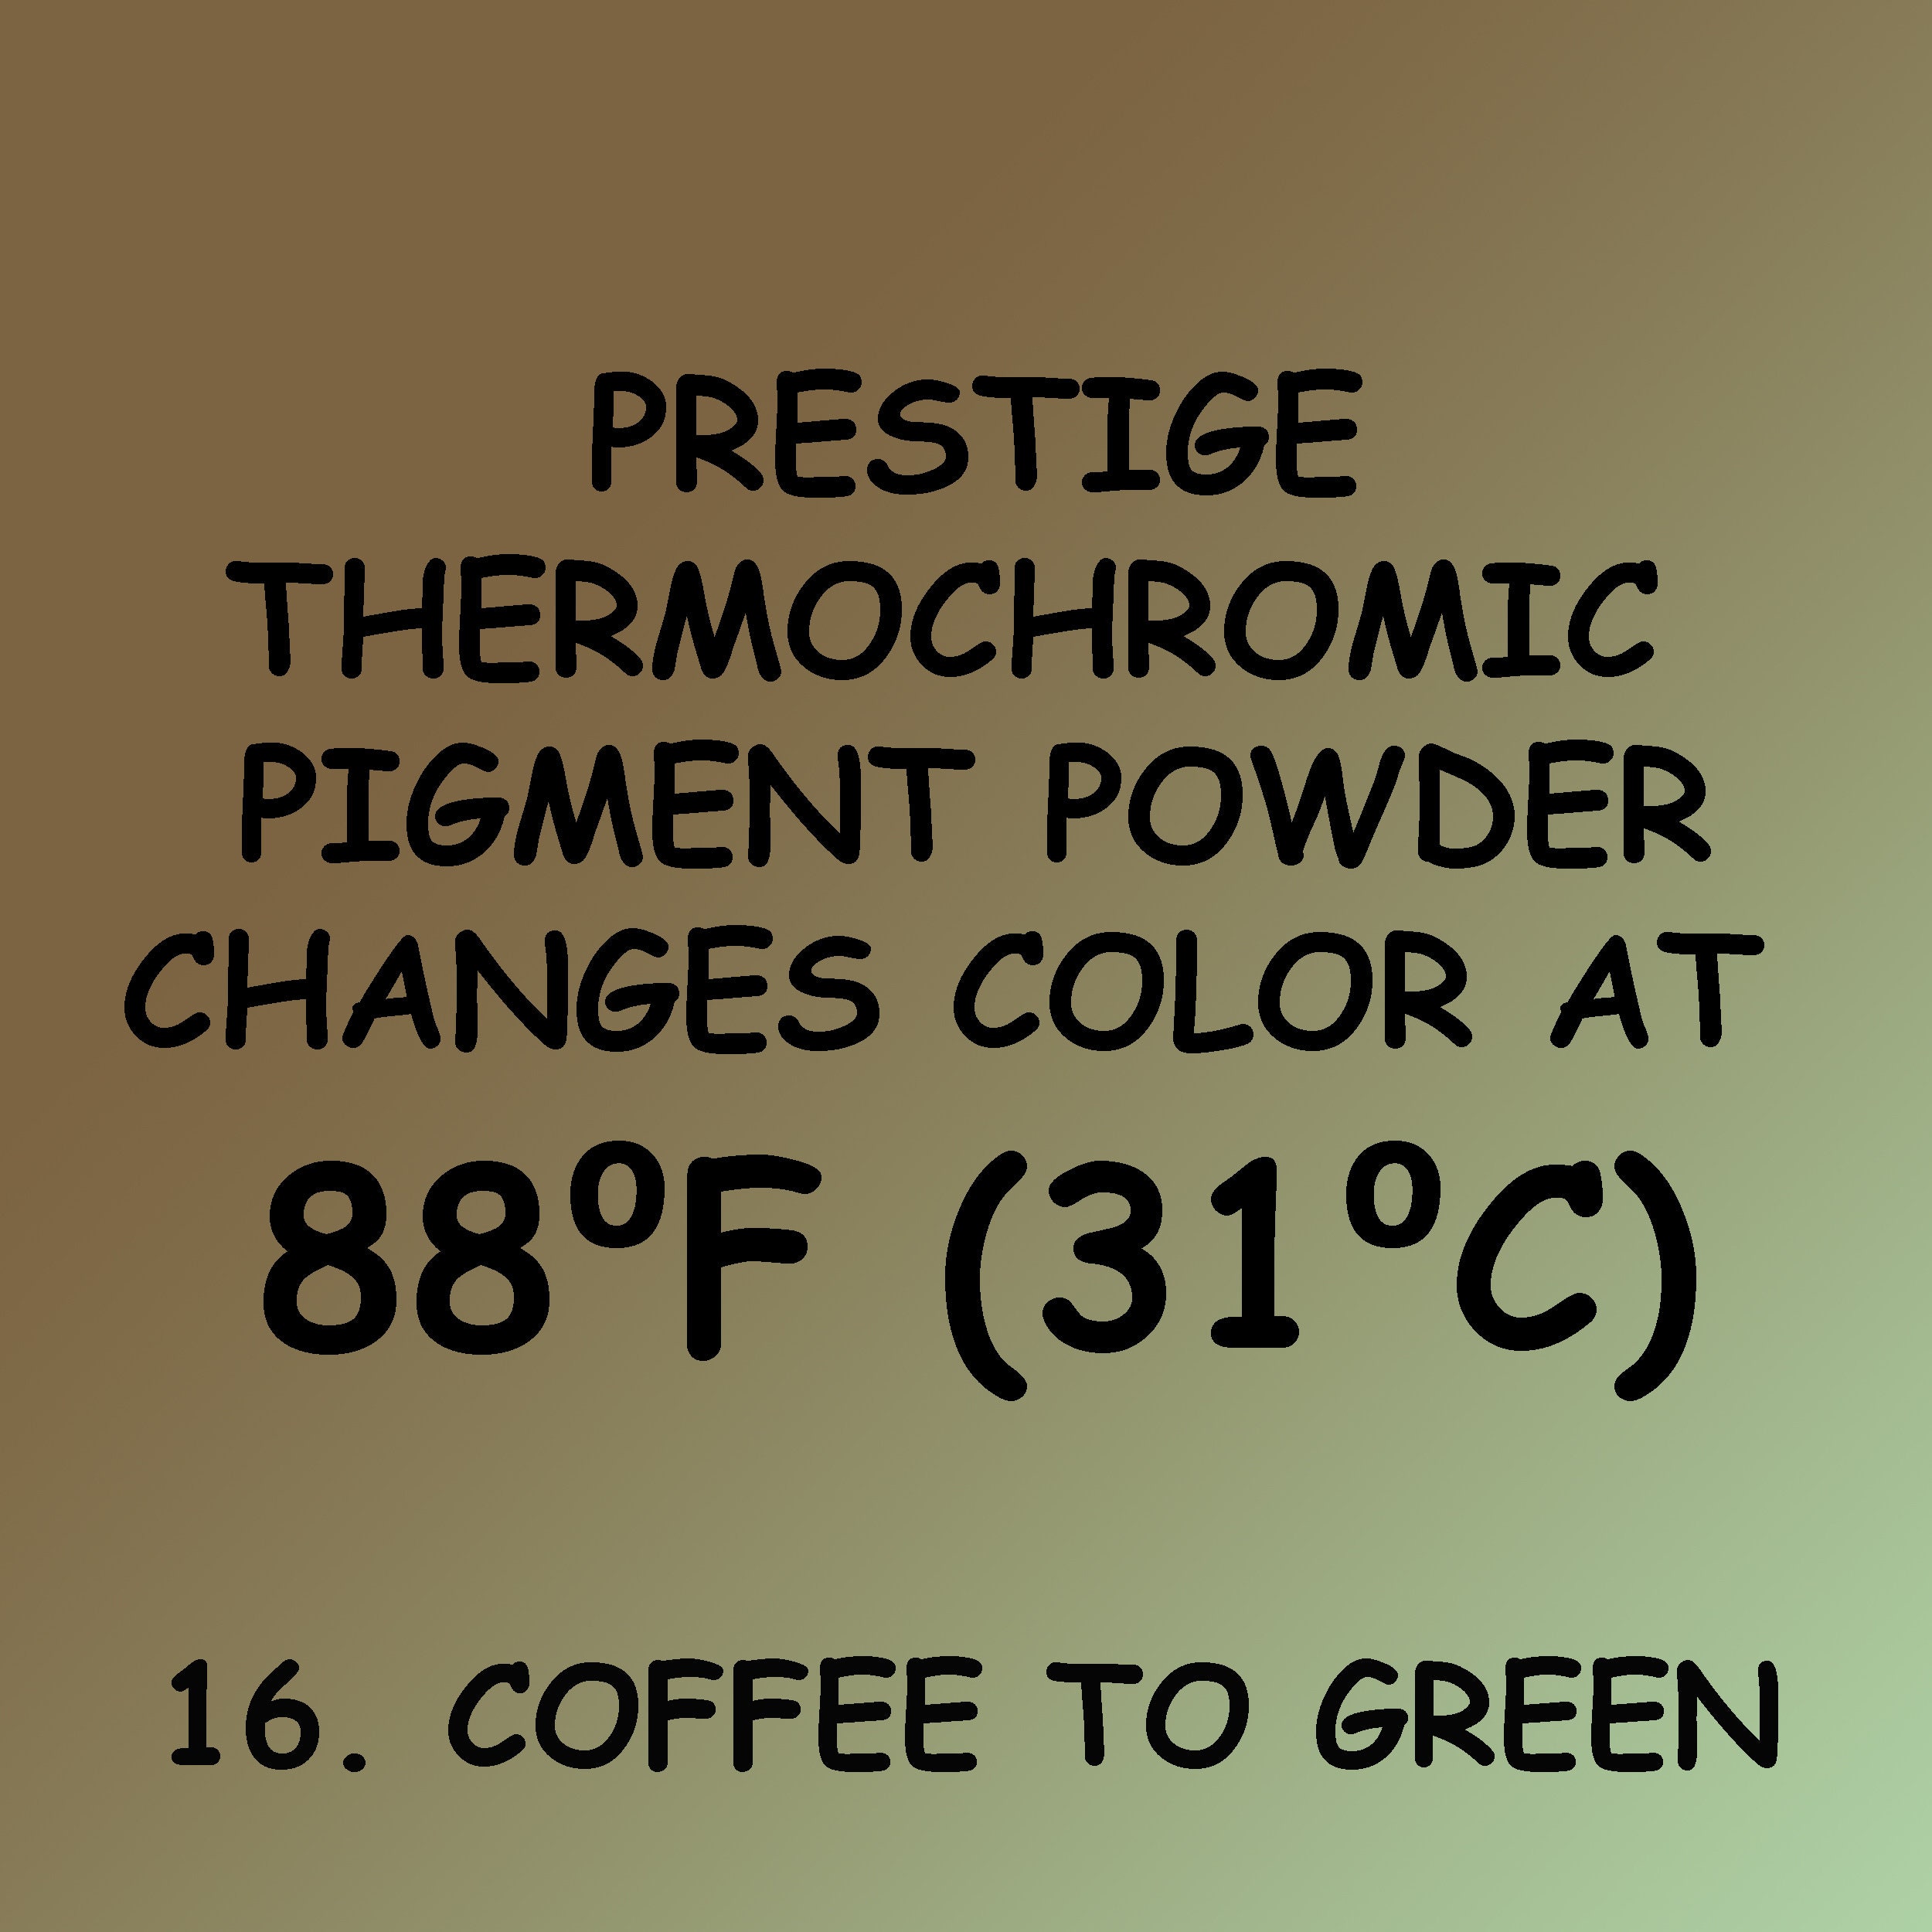 PRESTIGE THERMOCHROMIC PIGMENT Powder That Changes Color at 71.6F 22C,  Perfect for Heat-sensitive Color Changing Slime During the Winter 